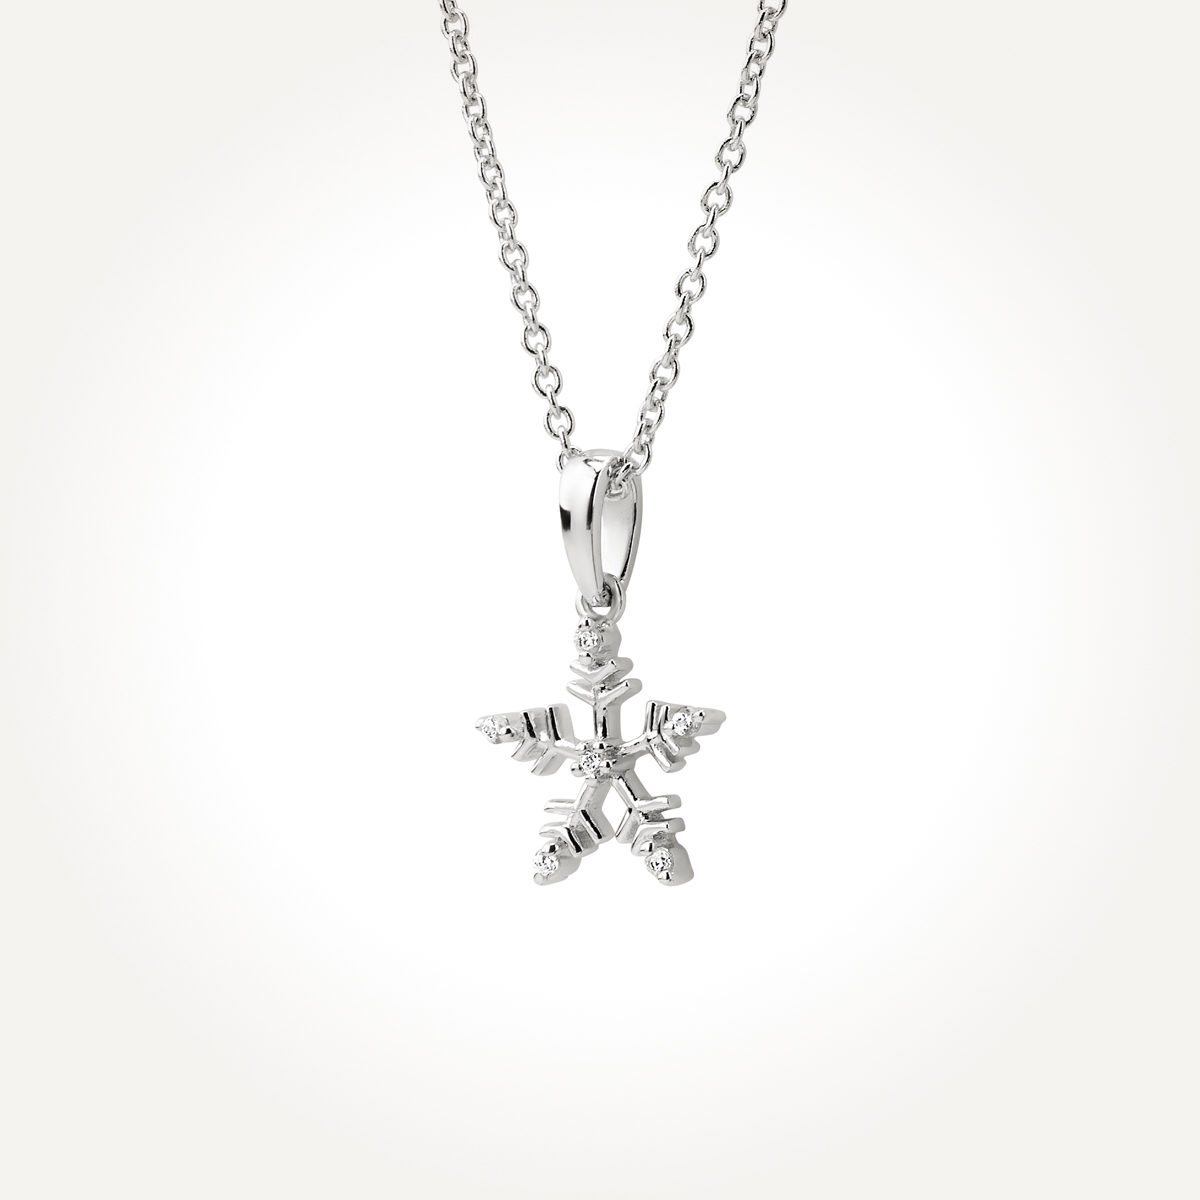 14KT White Gold Snowflake Necklace